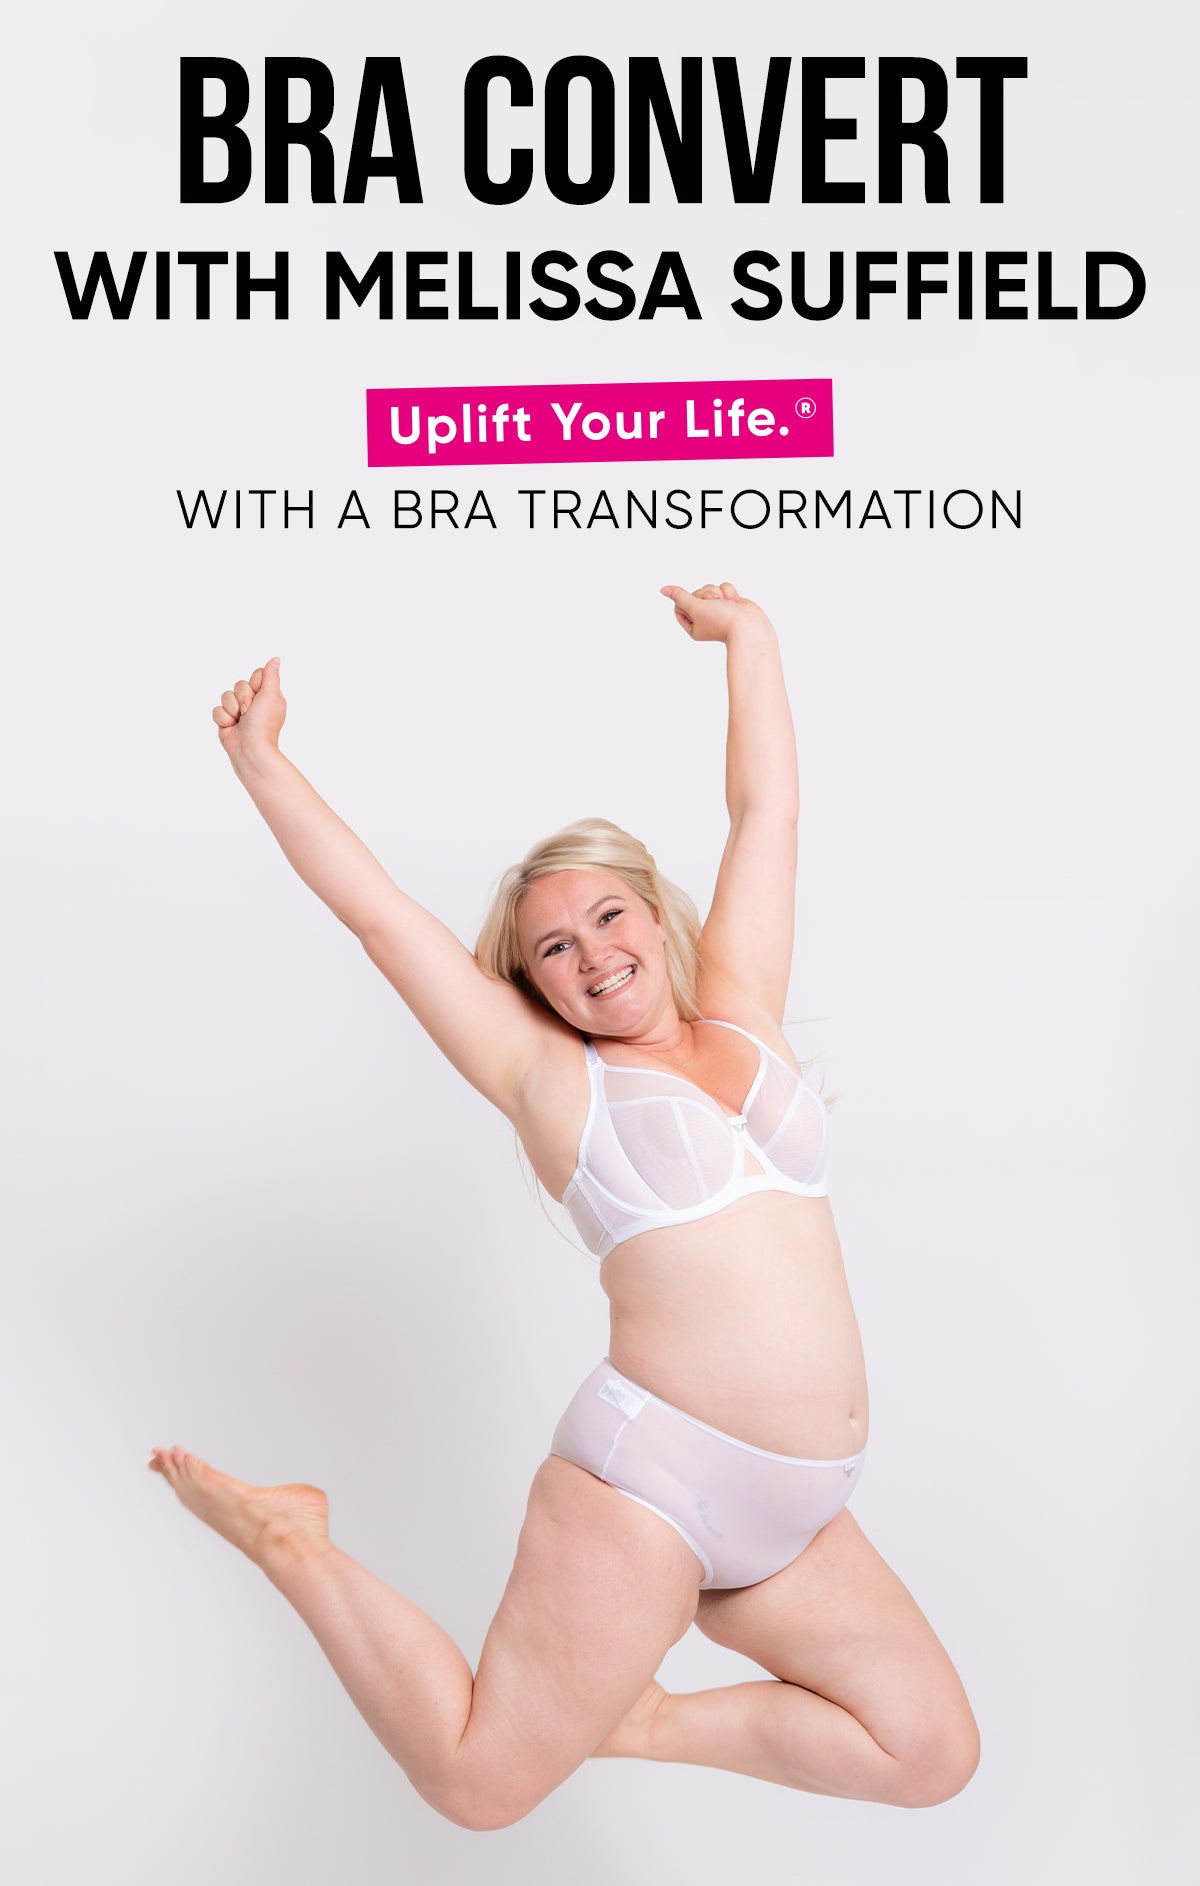 Bra Convert with Melissa Suffield - Uplift your life with a bra transformation